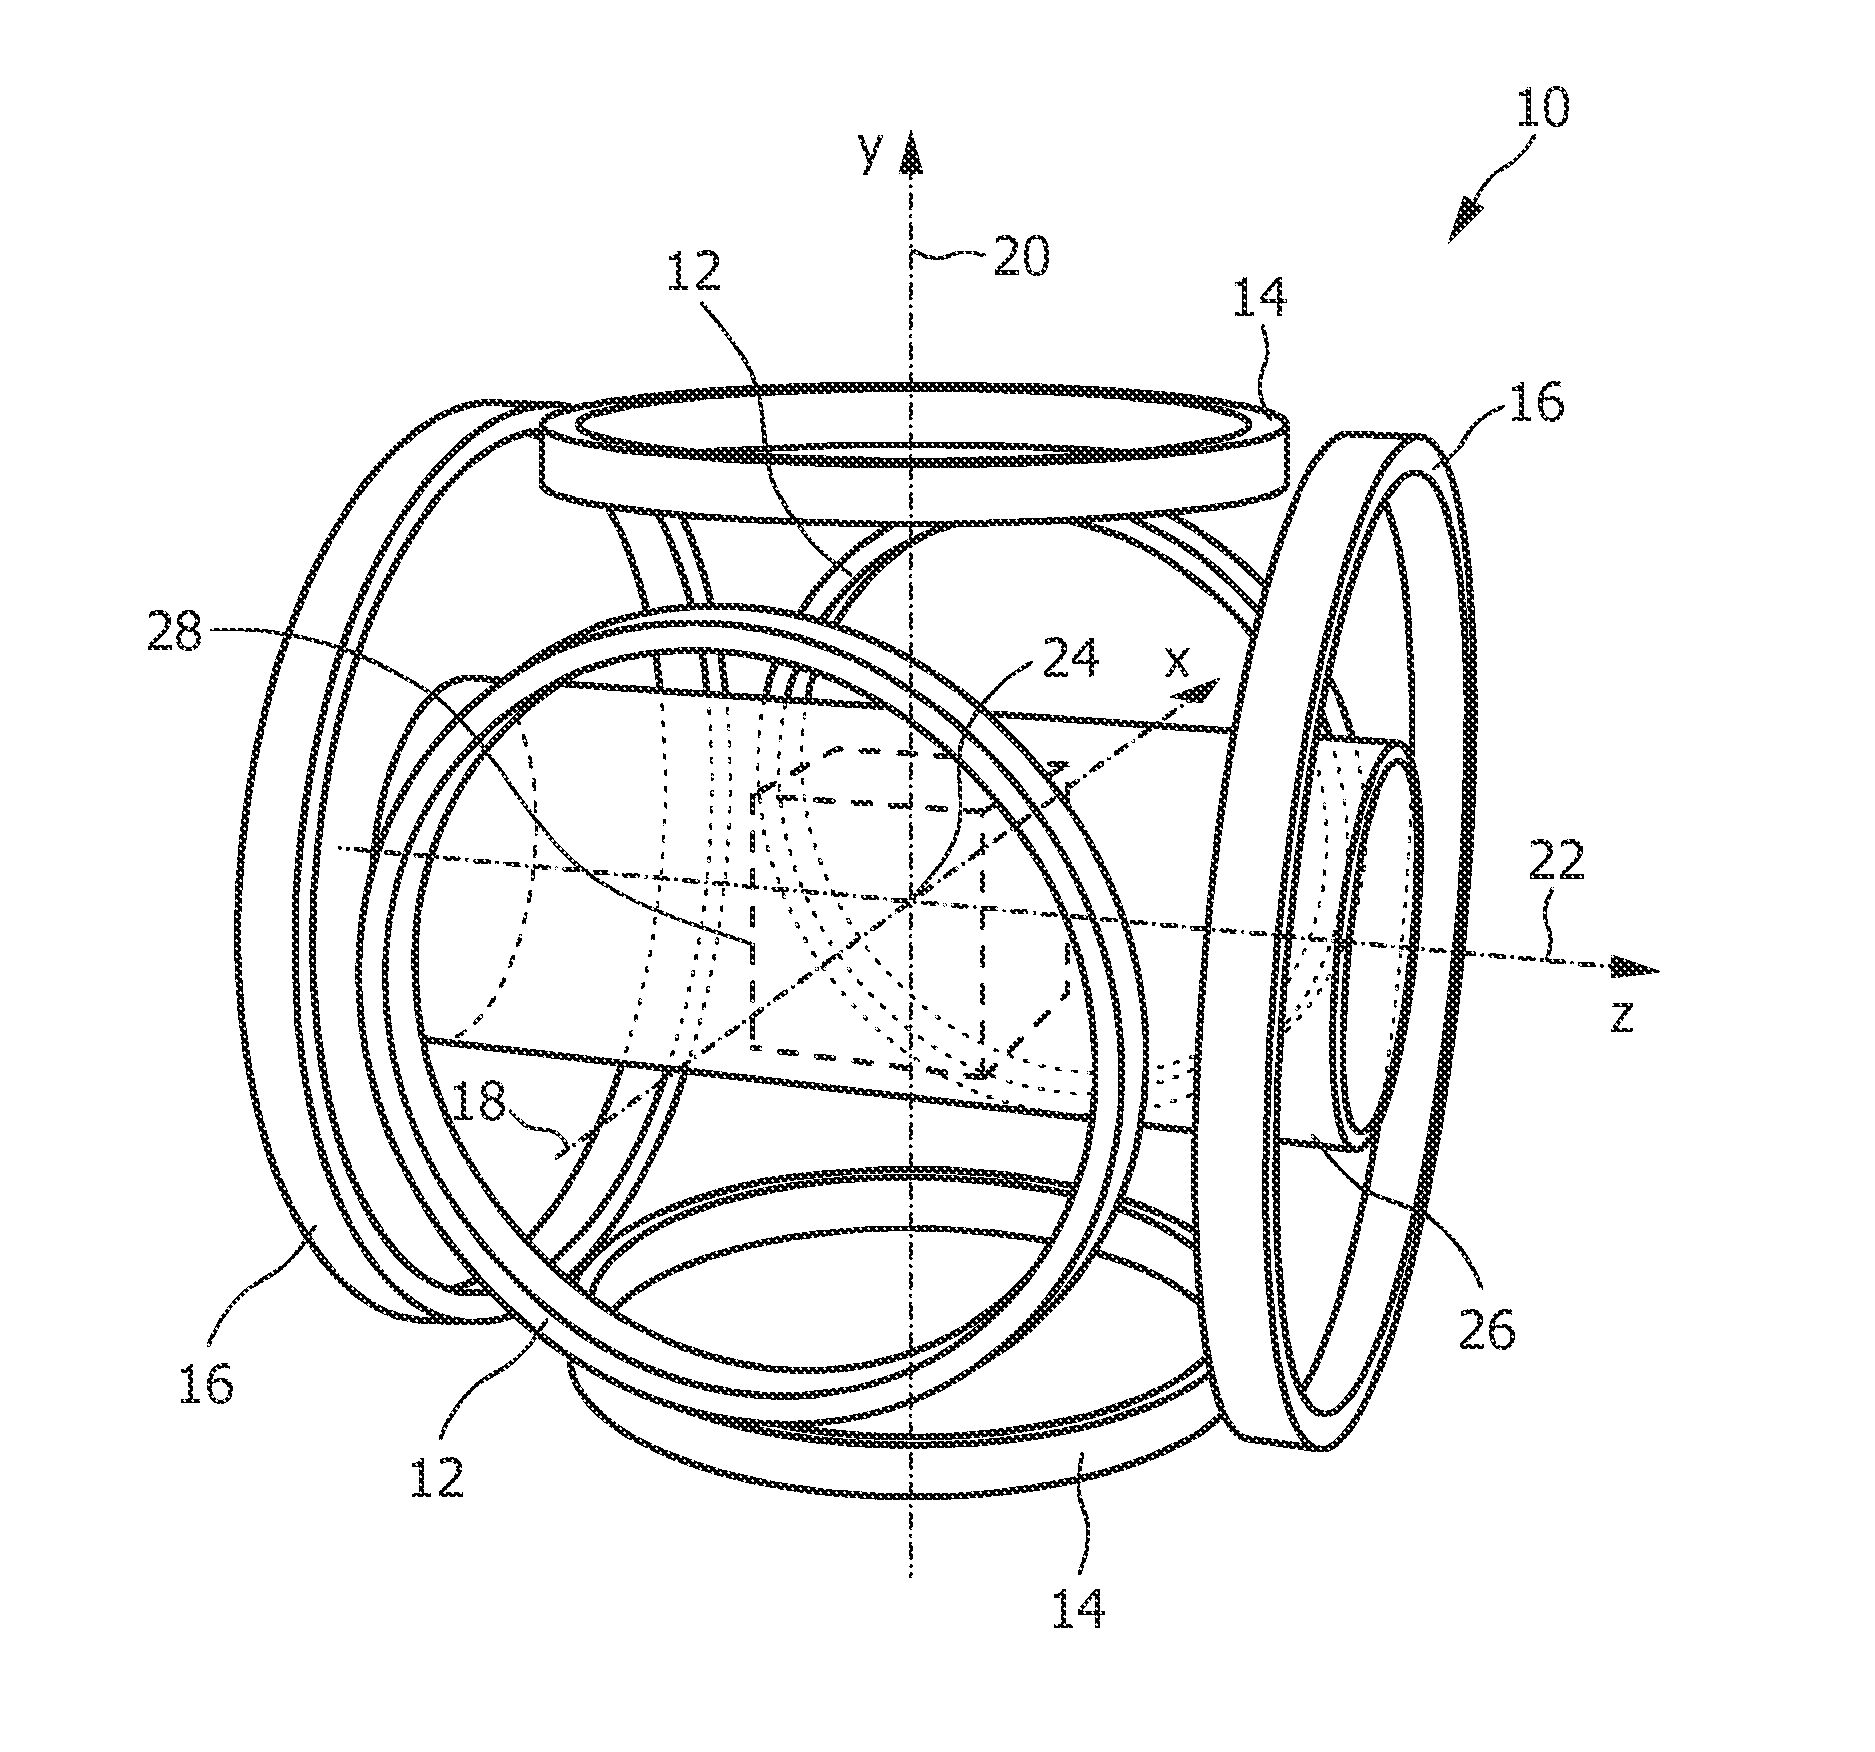 Apparatus and method for influencing and/or detecting magnetic particles in a field of view